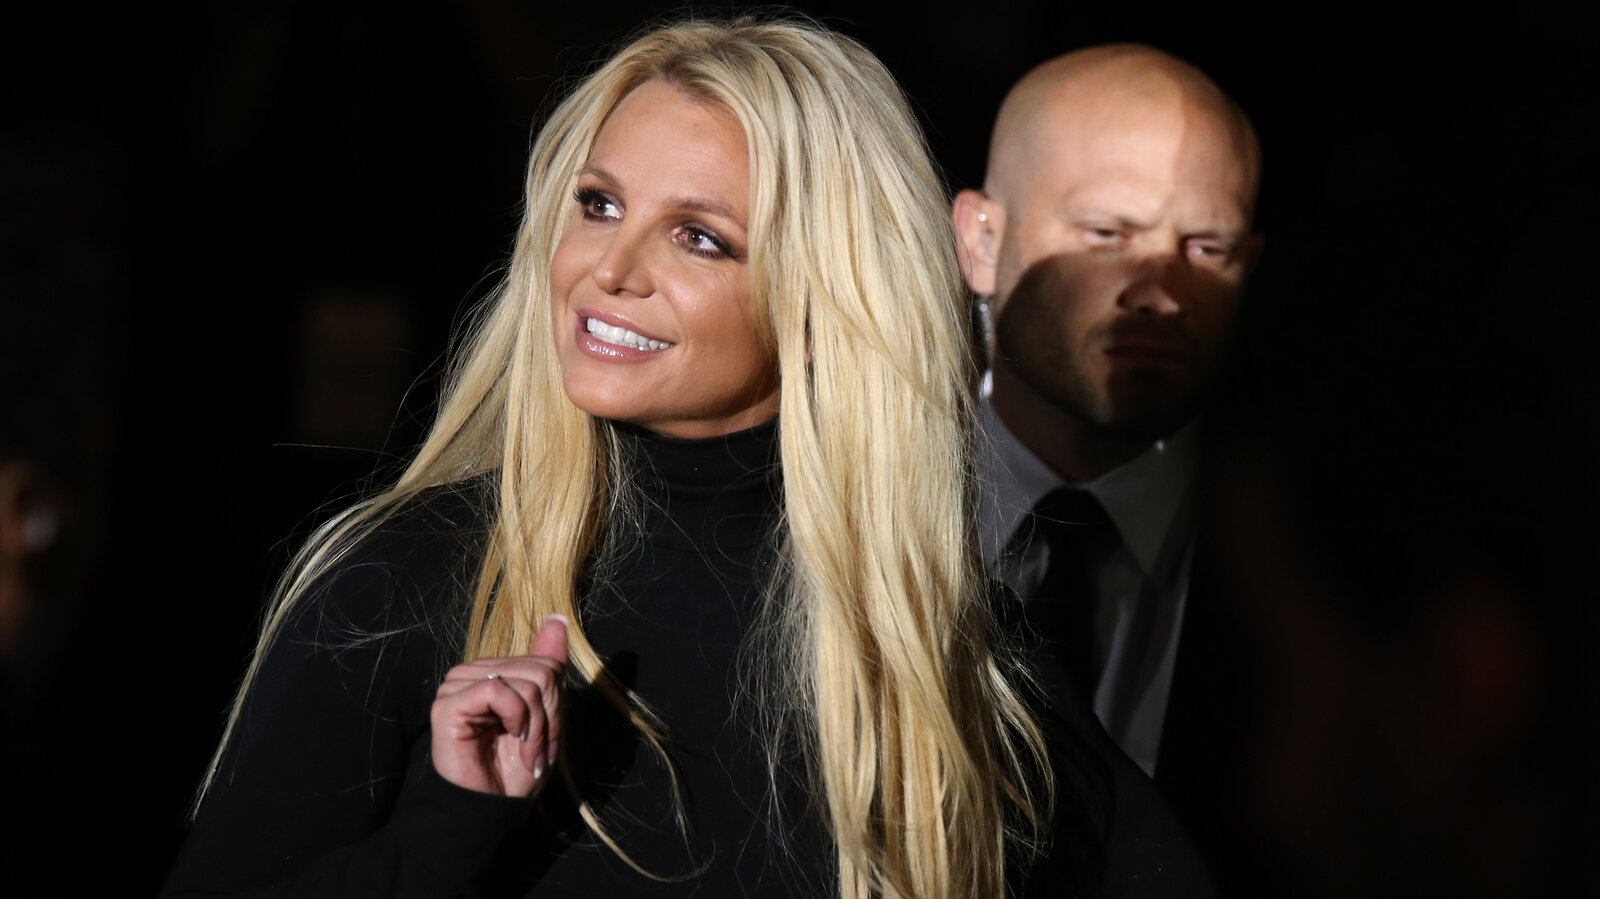 Britney Spears Reveals Her Struggle Against Virgin Image A Tale Of Control And Liberation 1868